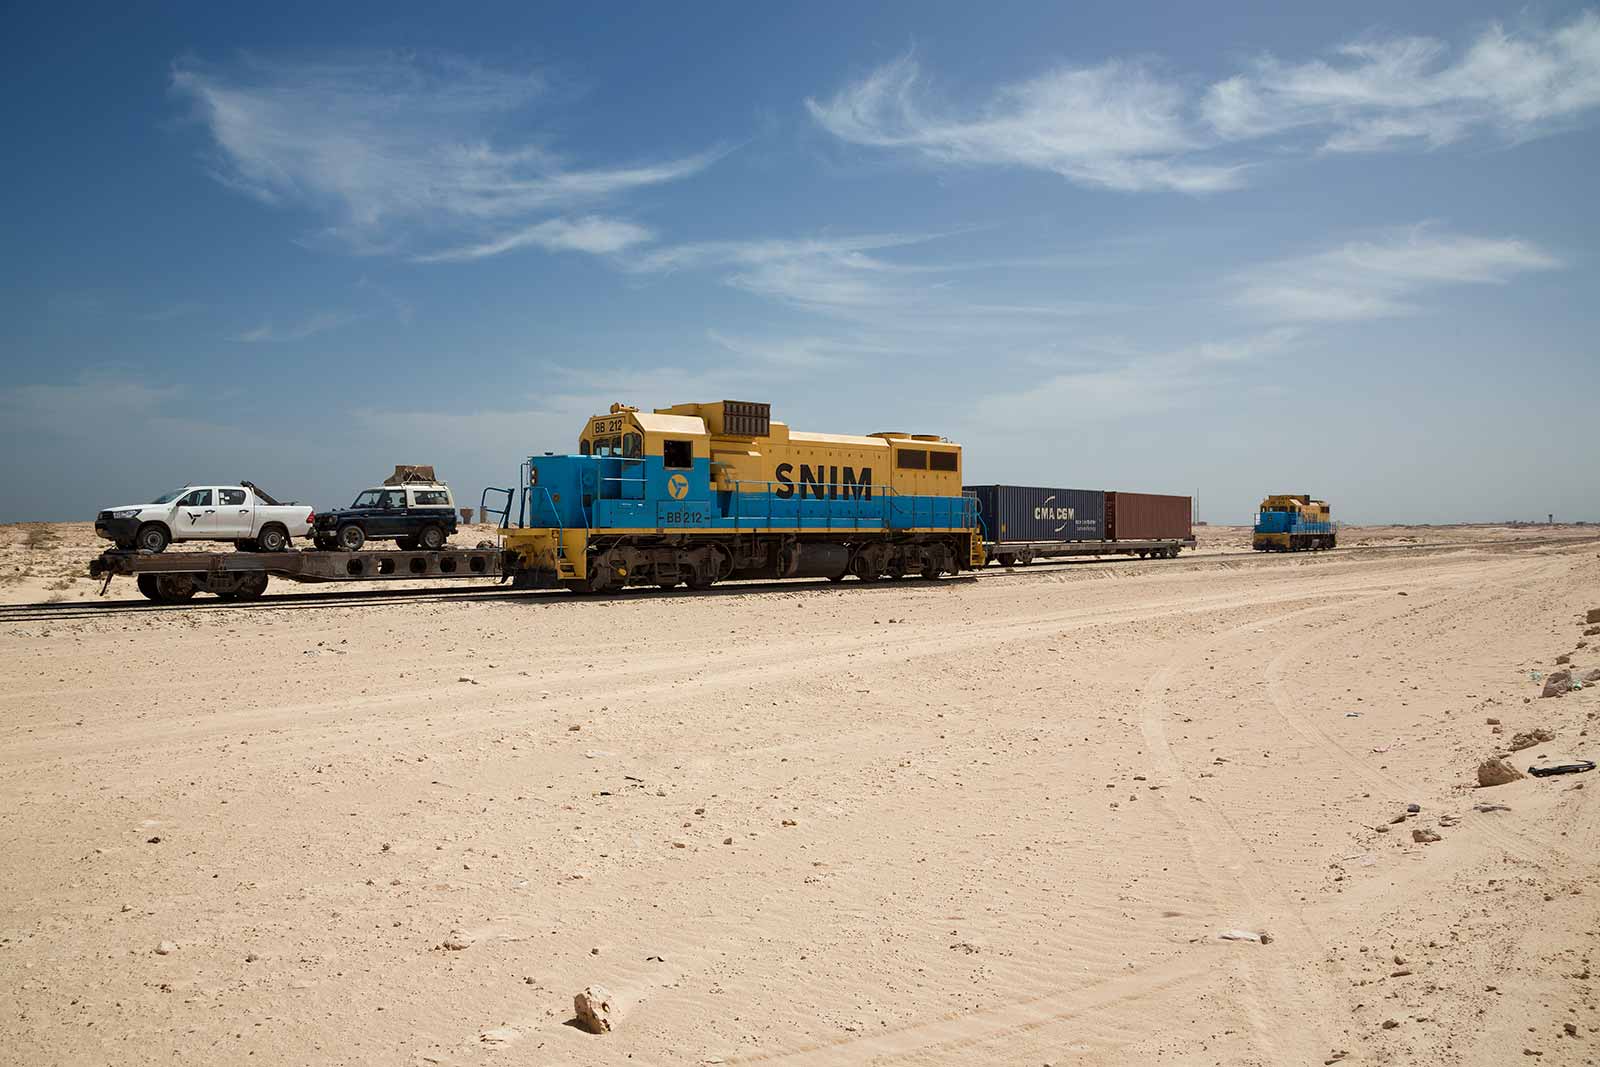 The Iron Ore Train fills its 2.5 km of wagons (which is the second longest on earth) with the iron ore and then heads back to the coastal city of Nouadhibou.